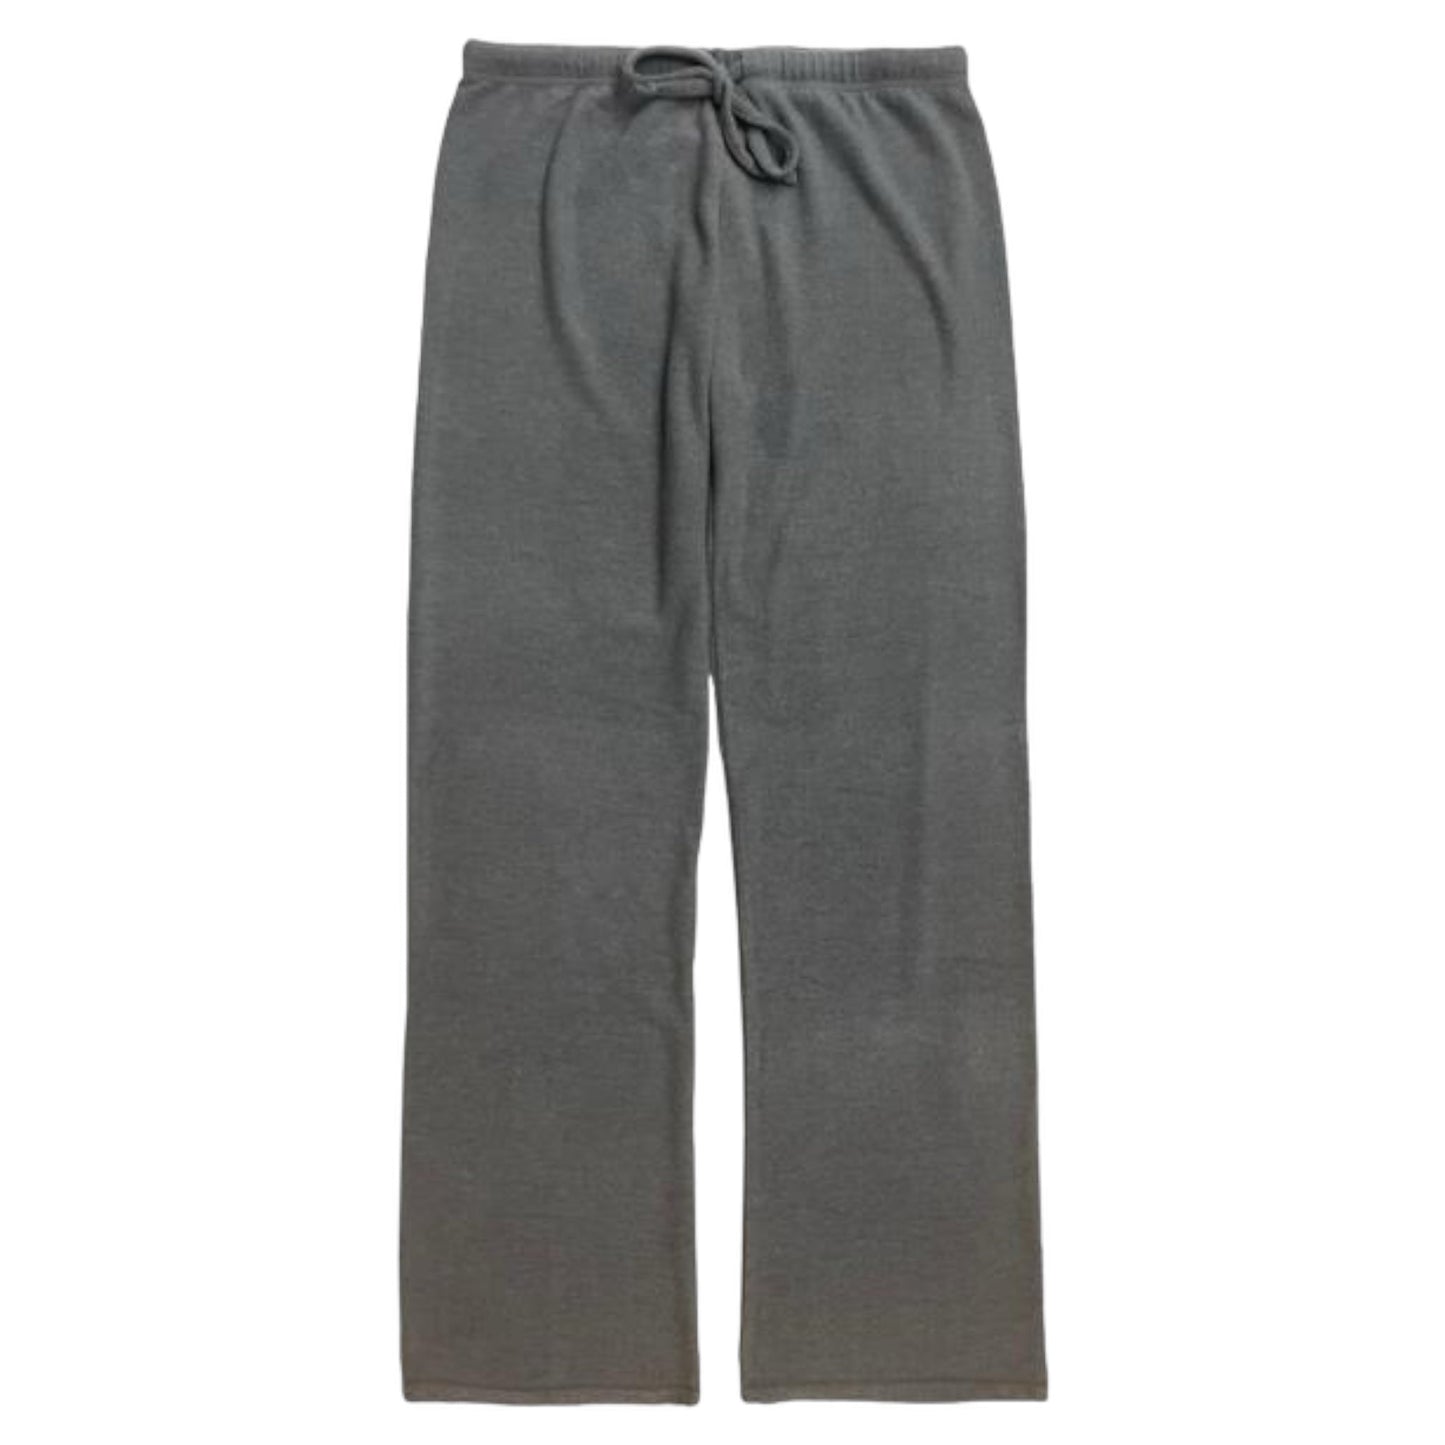 Cuddle Soft Straight Leg Pant - Tons of Colors Available